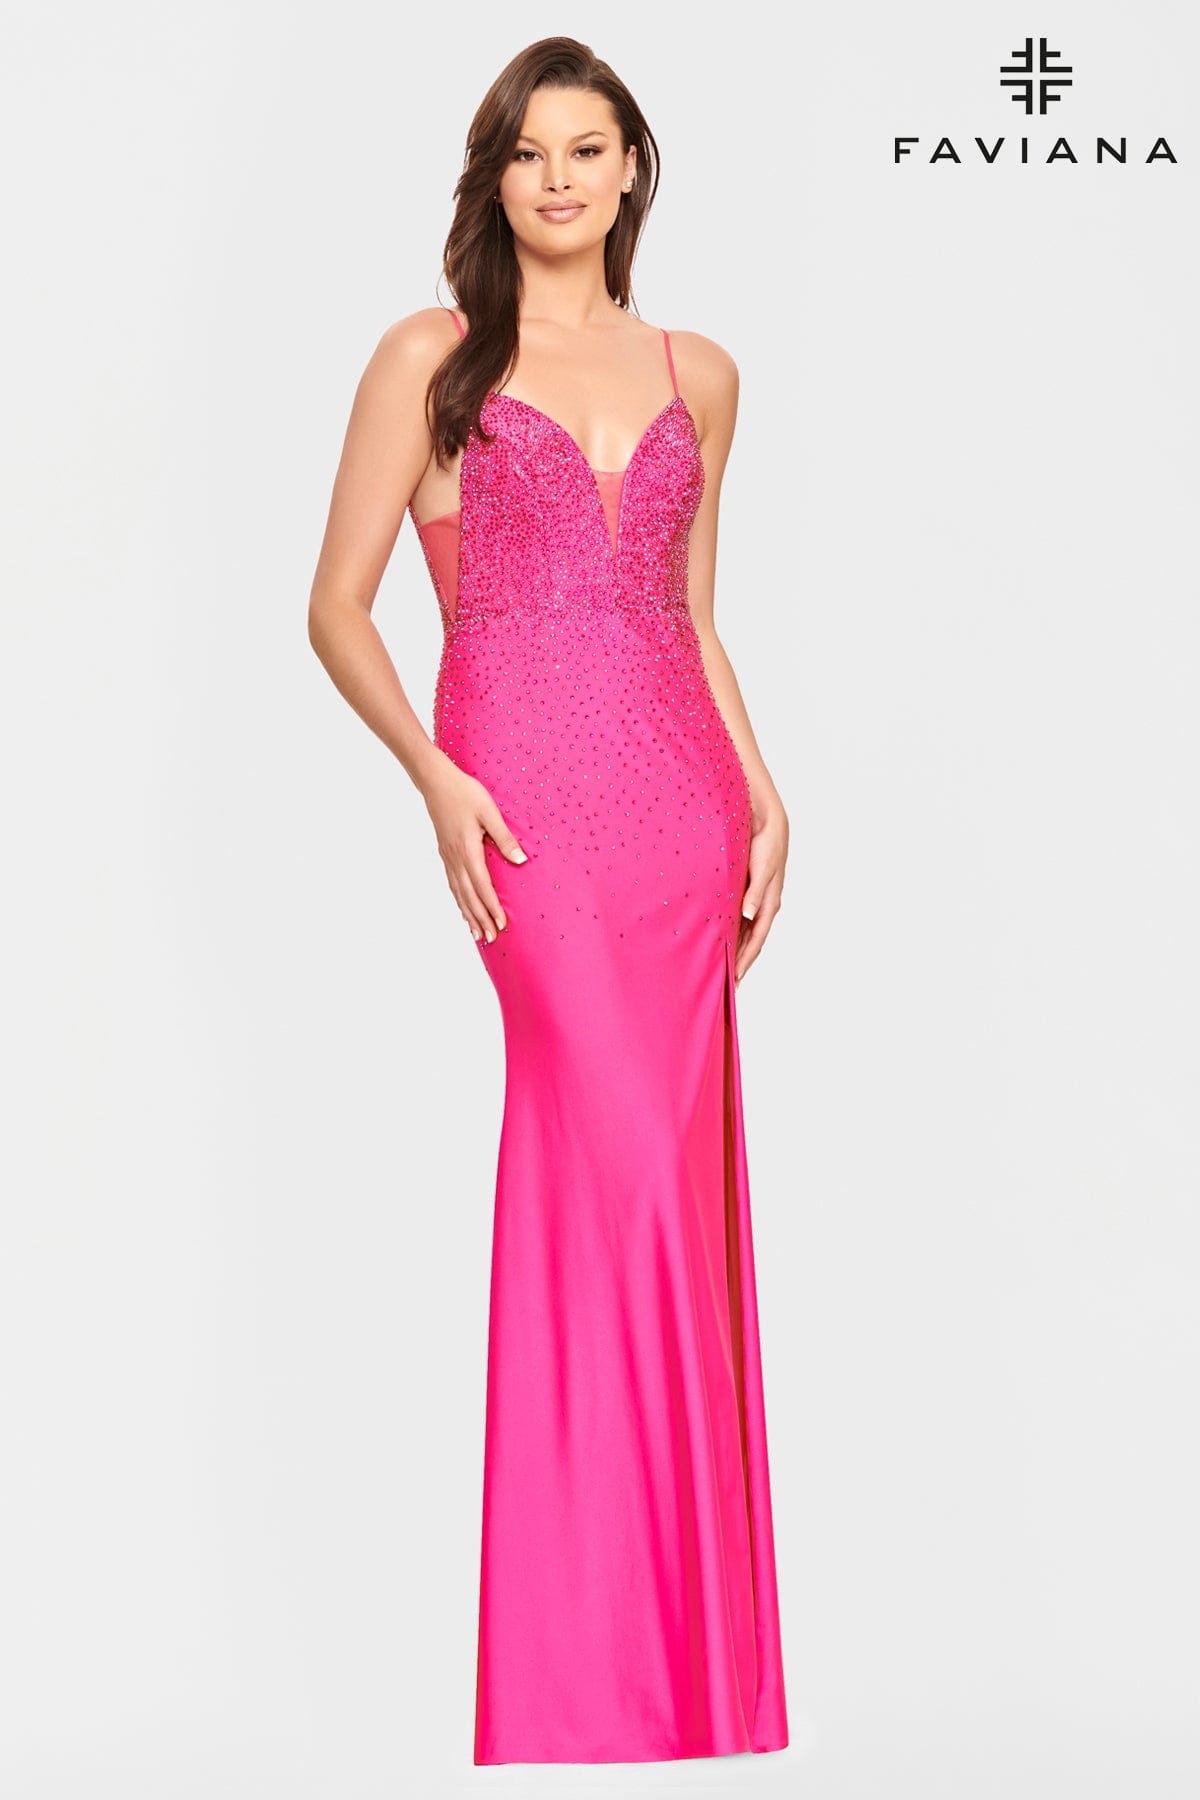 Tight Long Beaded Prom Dress With Deep V Neck And Mesh Side Panels